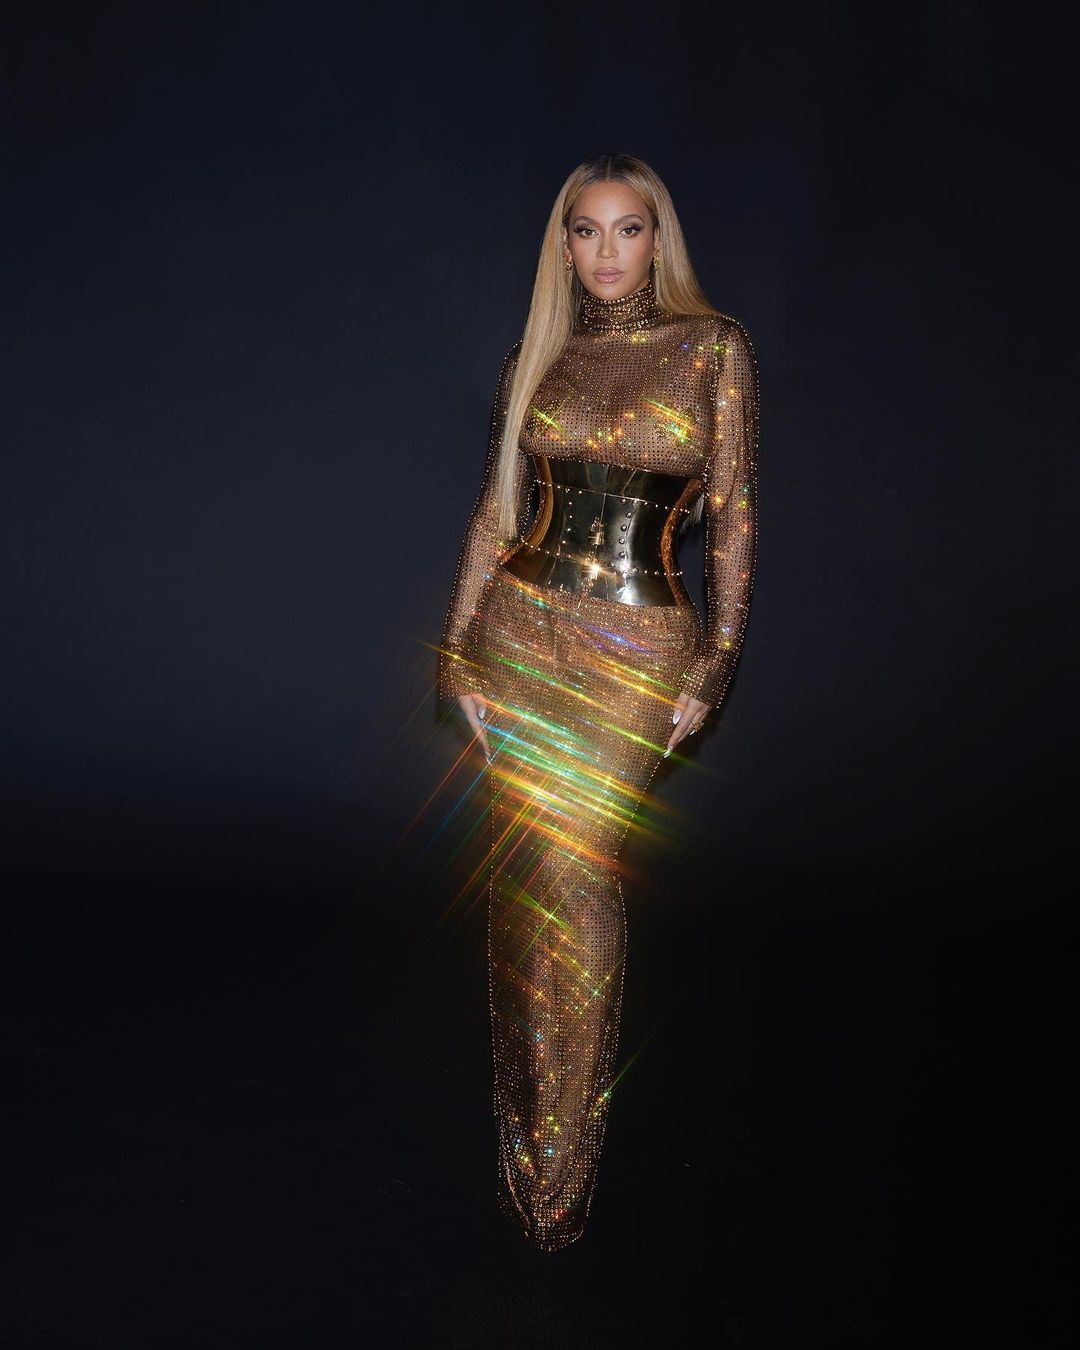 Photos n°2 : Beyonce Shines in a See Through Dress!